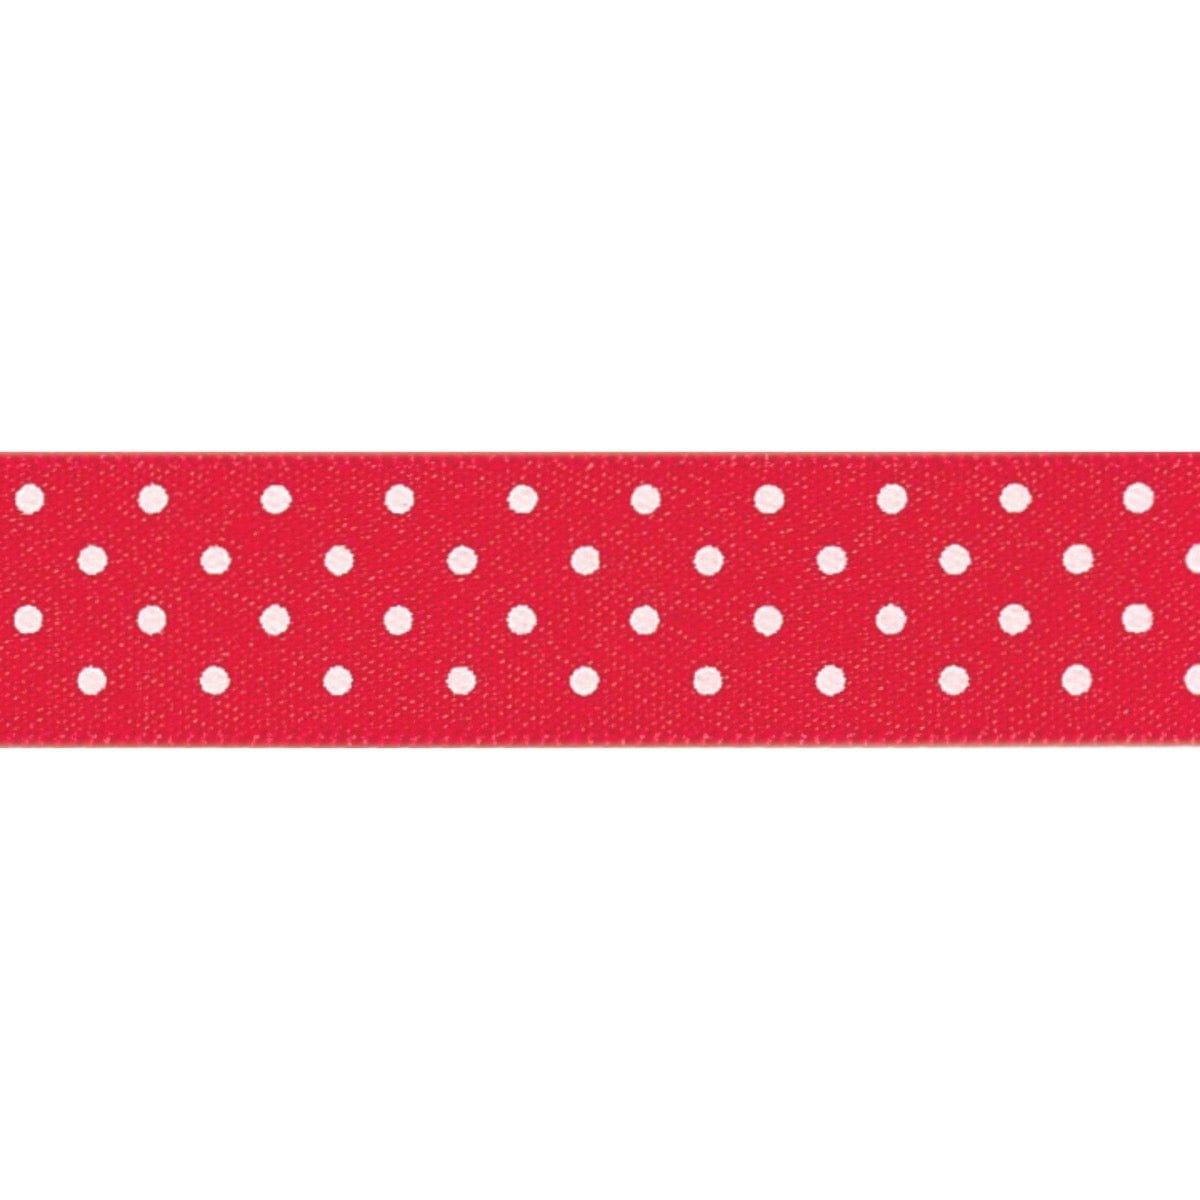 Micro Dot Ribbon: Red and white: 15mm wide: Price per metre.